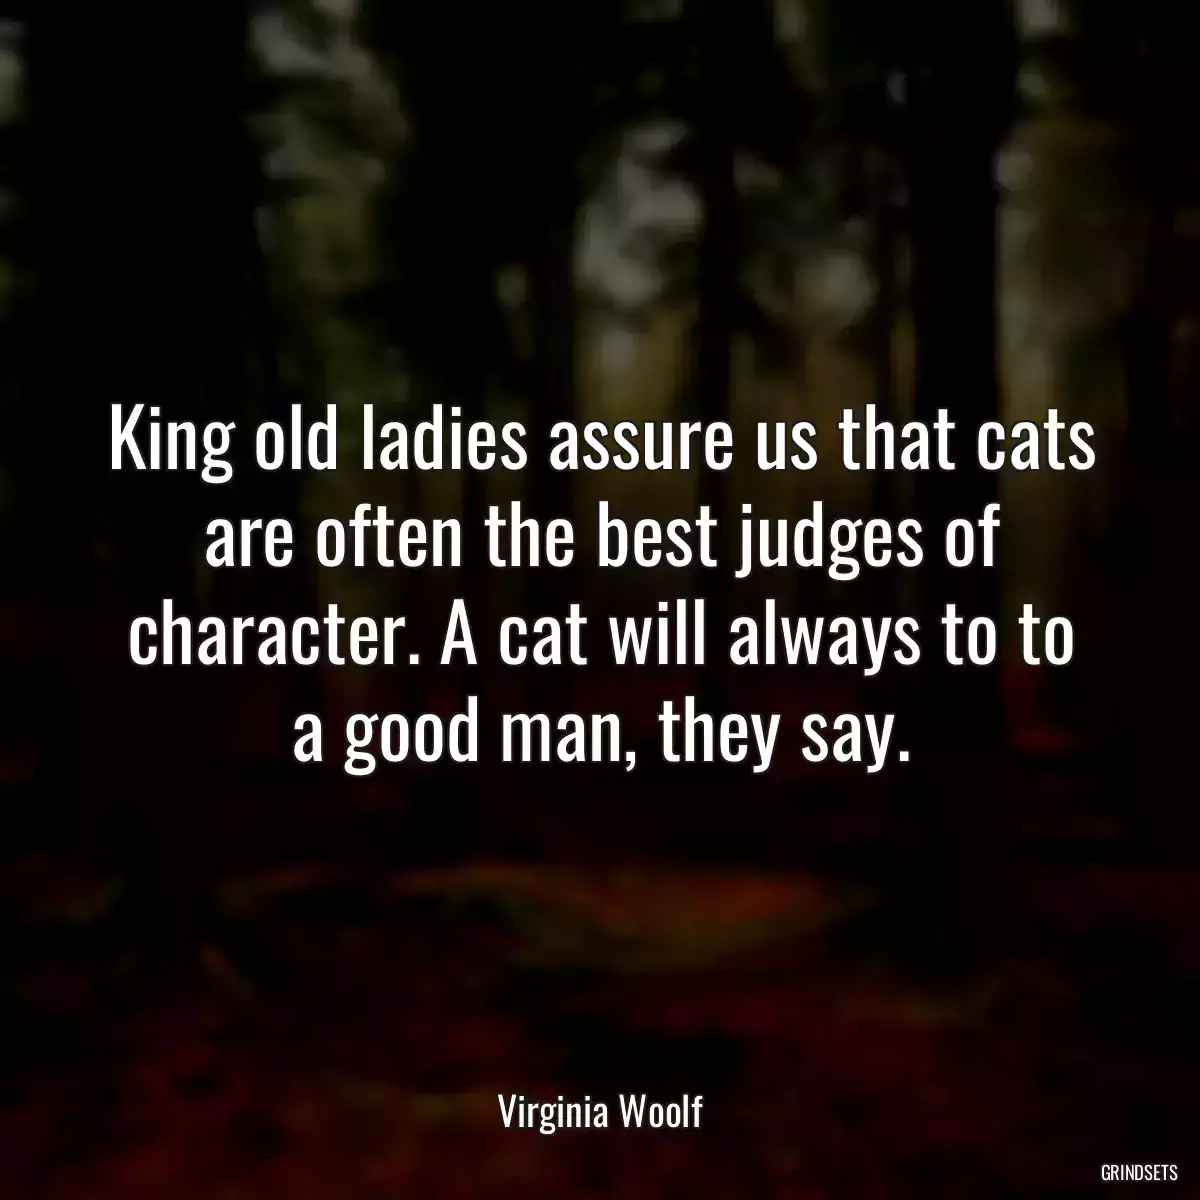 King old ladies assure us that cats are often the best judges of character. A cat will always to to a good man, they say.